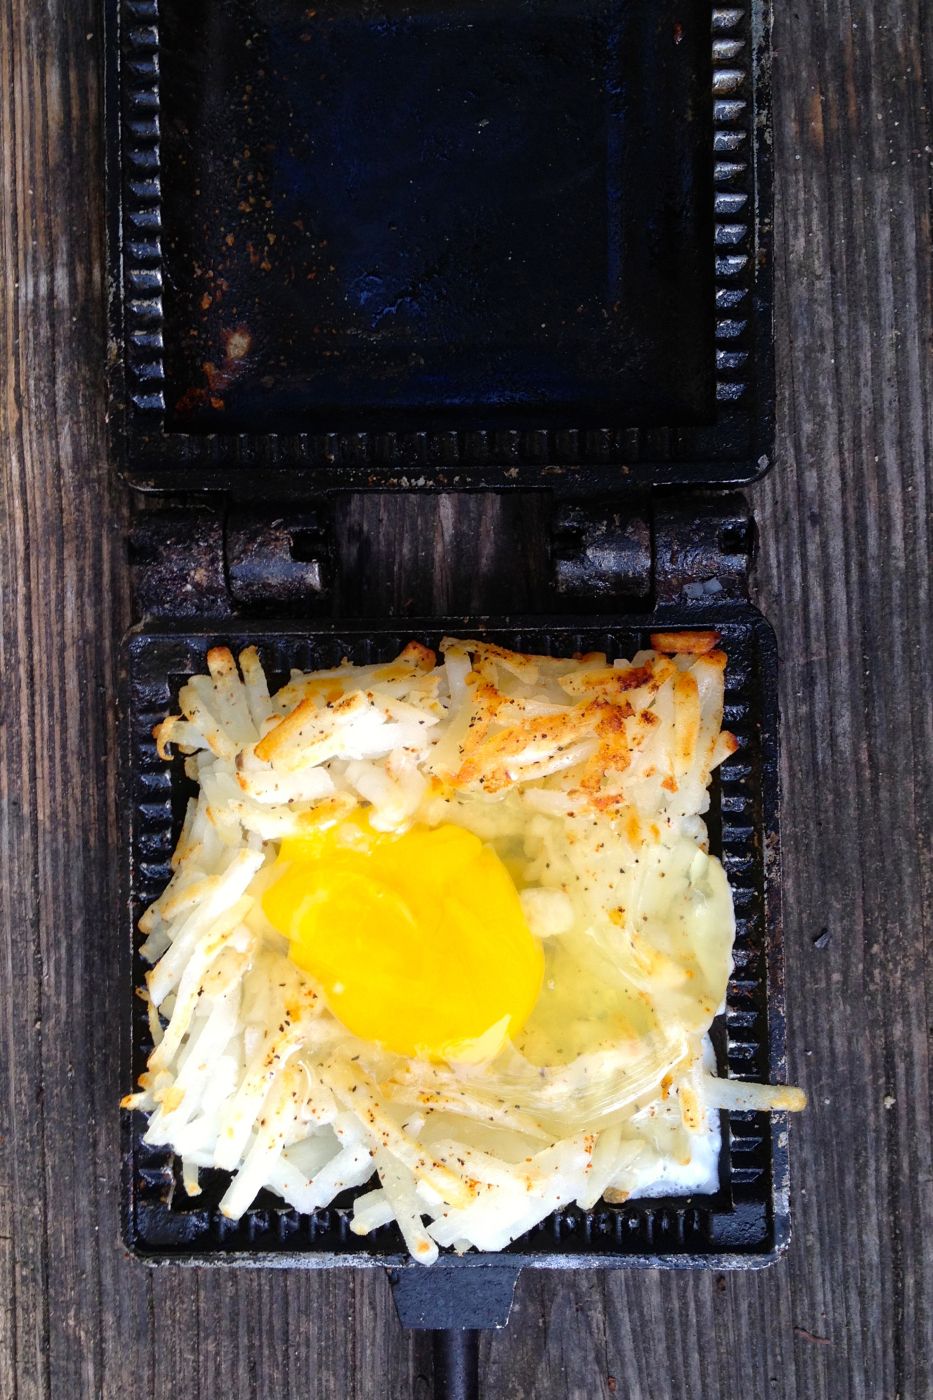 Campfire Grilled Cheese Sandwiches - Pie Iron or Griddle